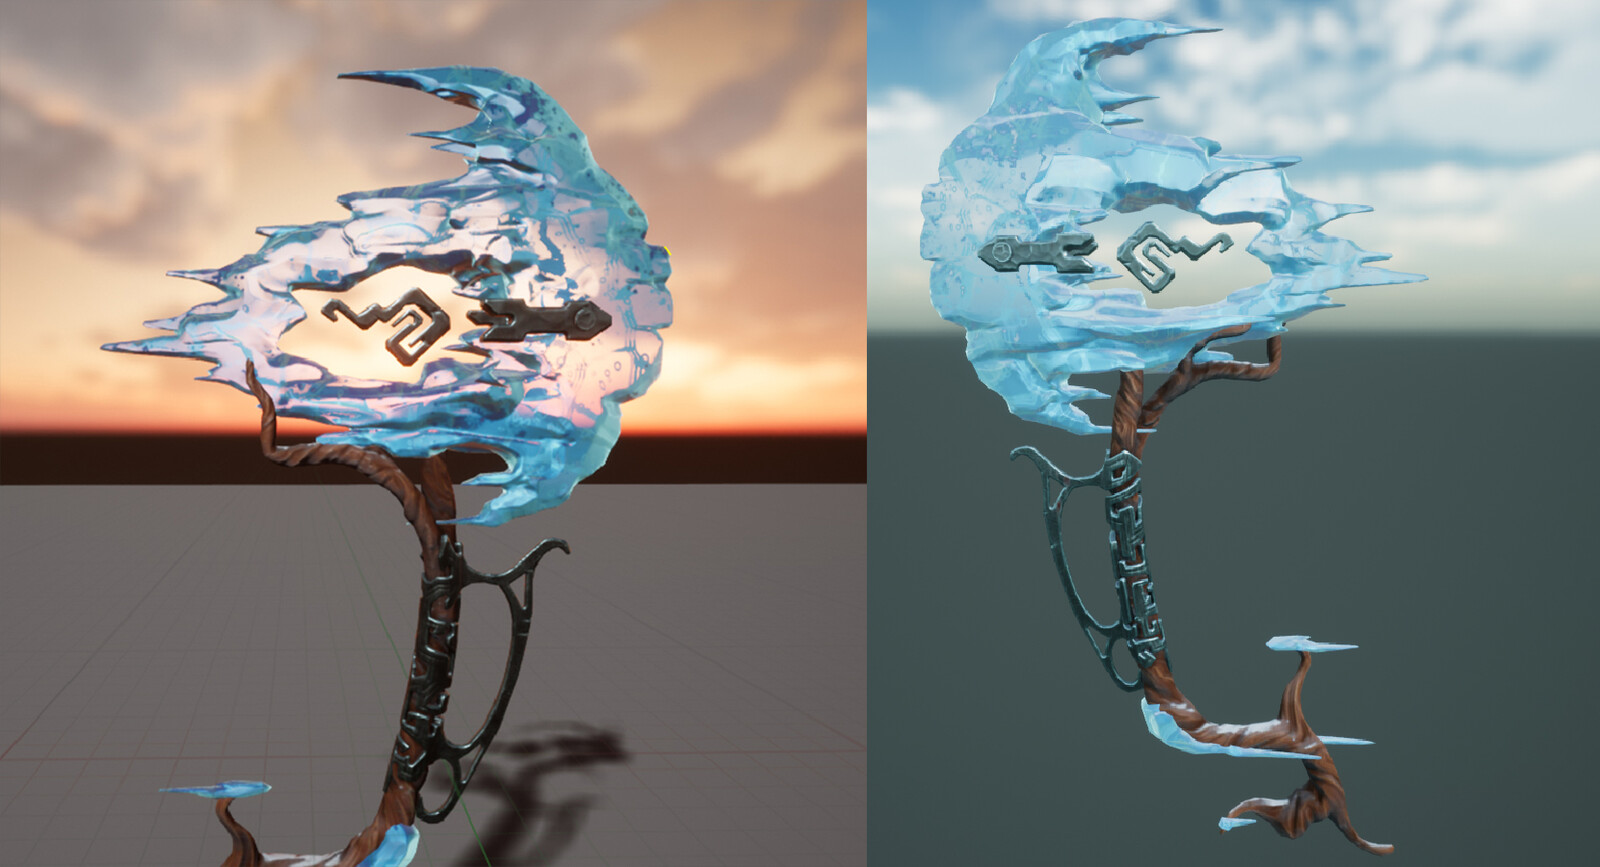 Some screens from UE4 showing the asset in different lighting scenarios. The ice material has some paralax in the cracks/bubbles.